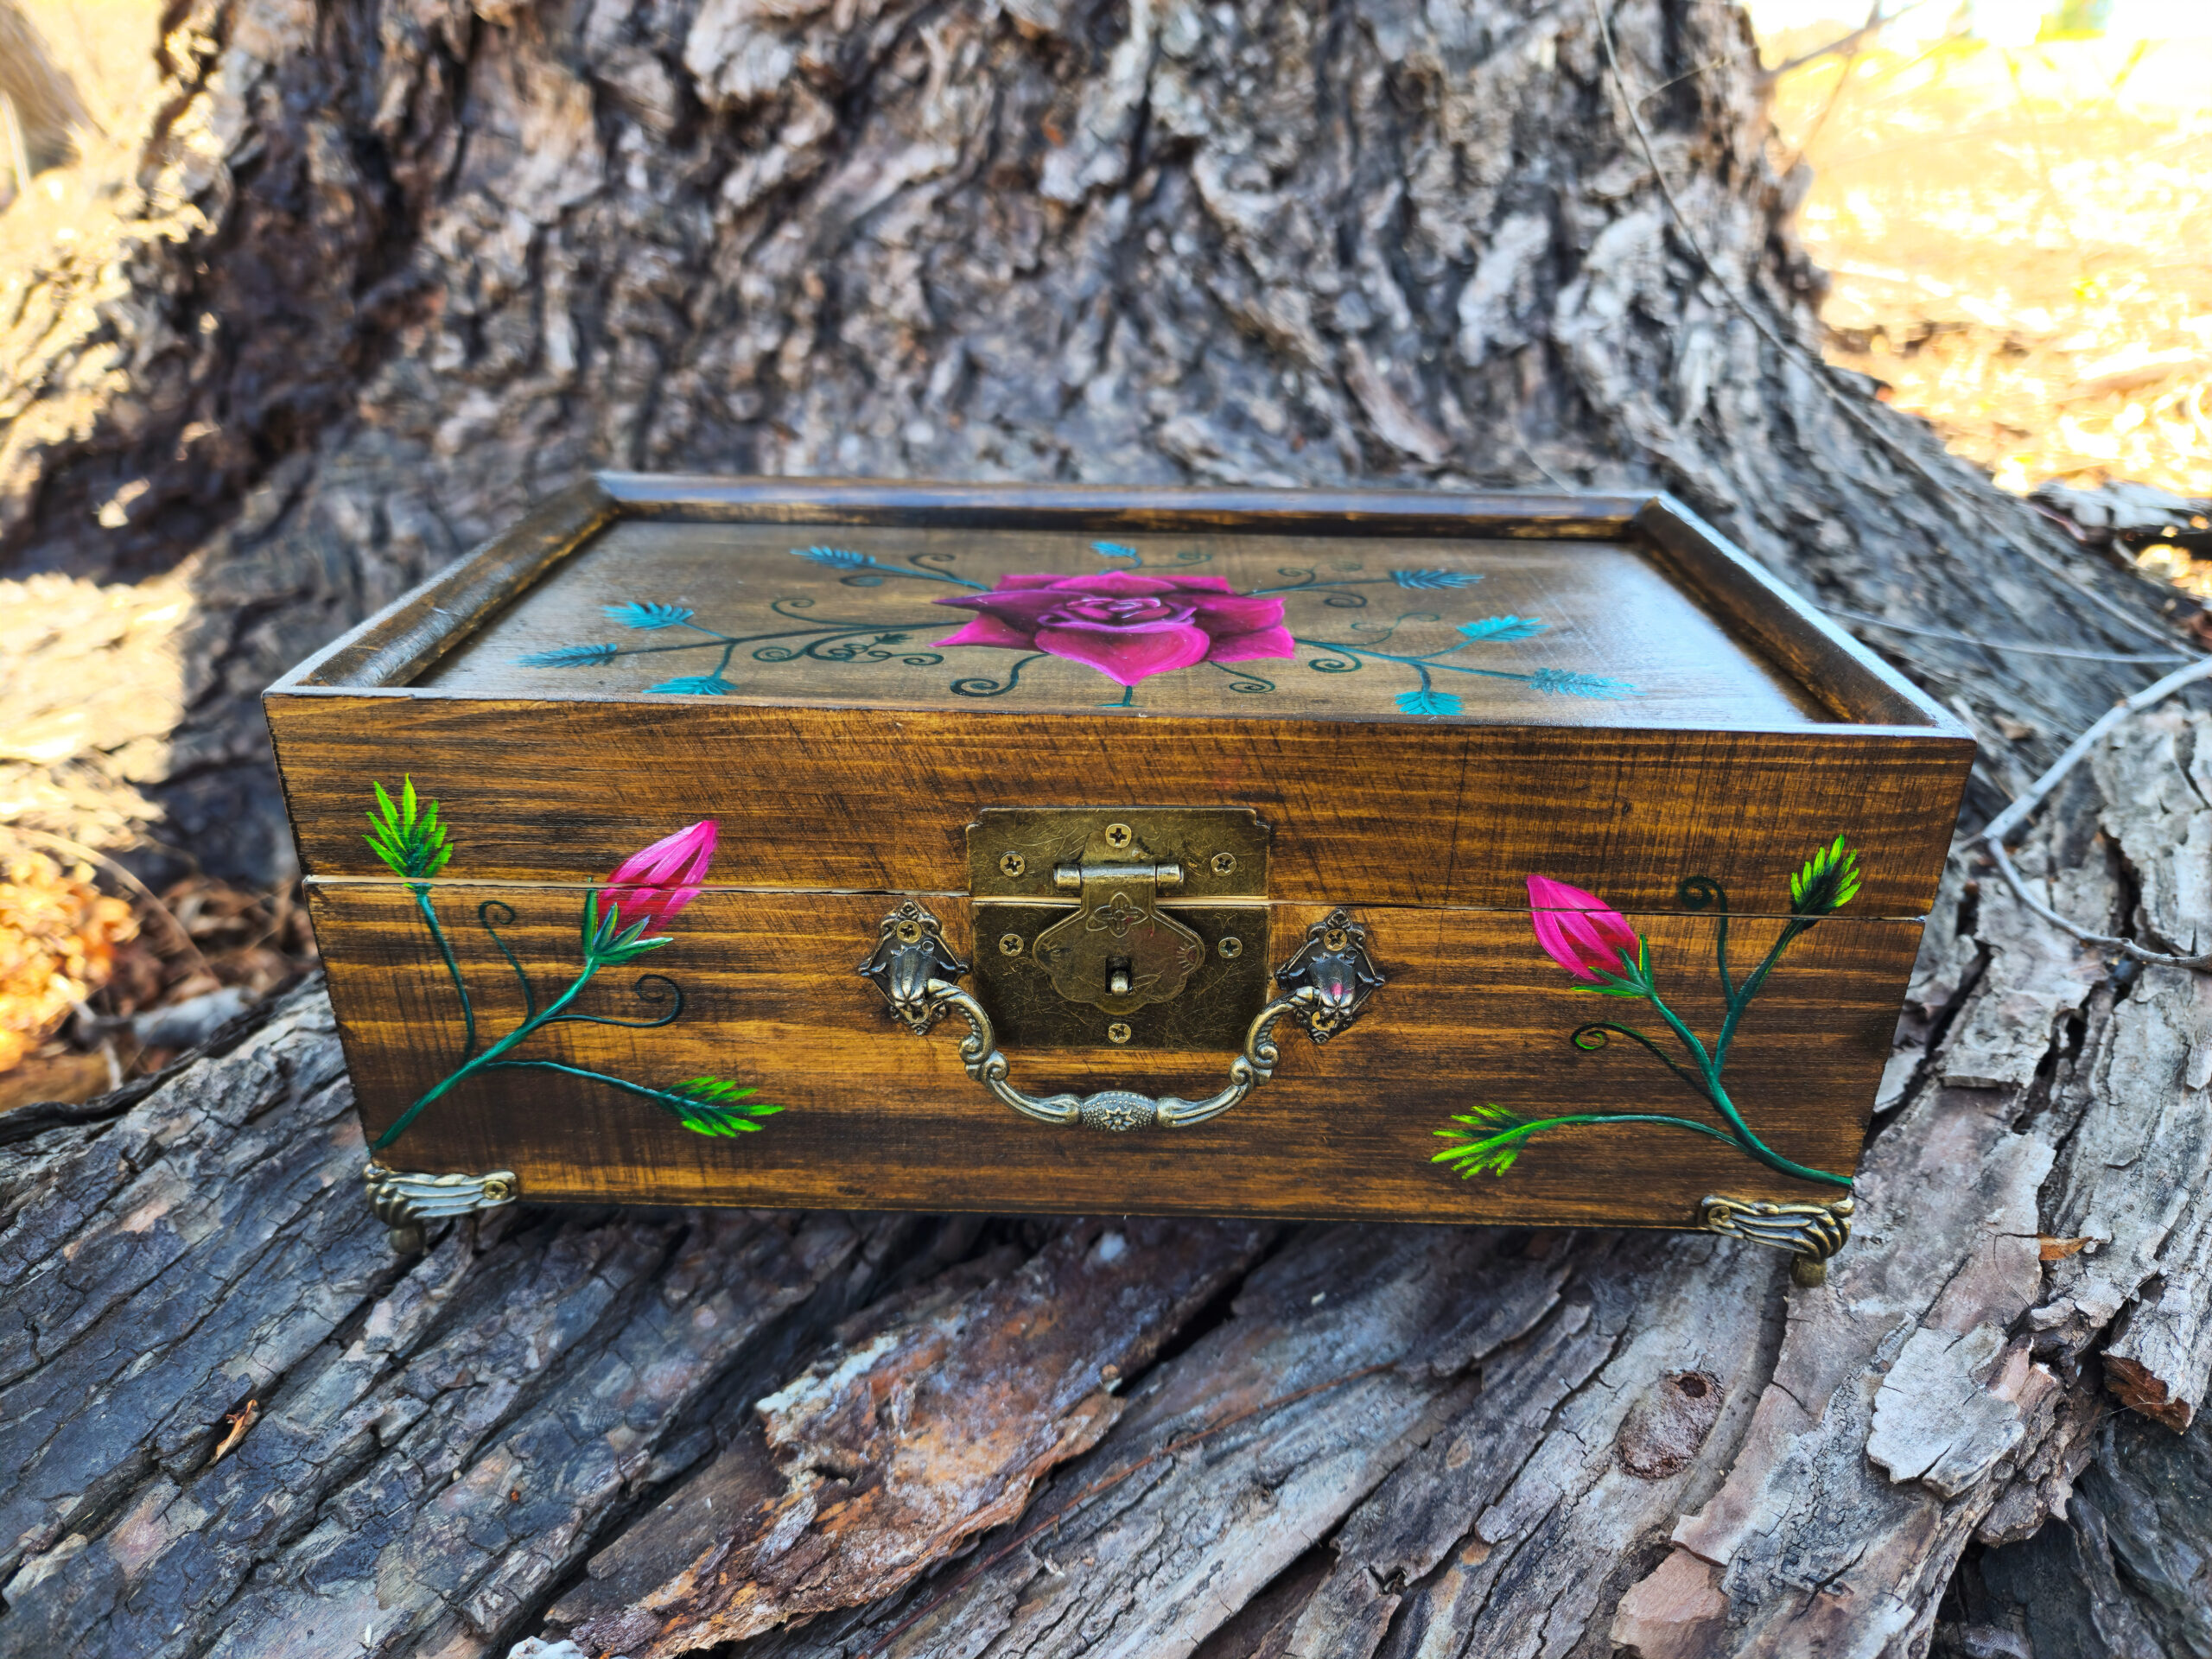 Beautiful handpainted trinket boxes with metal feet and a mirror. This cute trinket box is an ideal gift for a special beloved one. You can store jewelry such as rings, necklaces, bracelets, or anything you would like to keep in a particular place, especially in this elegant and artistic trinket box.